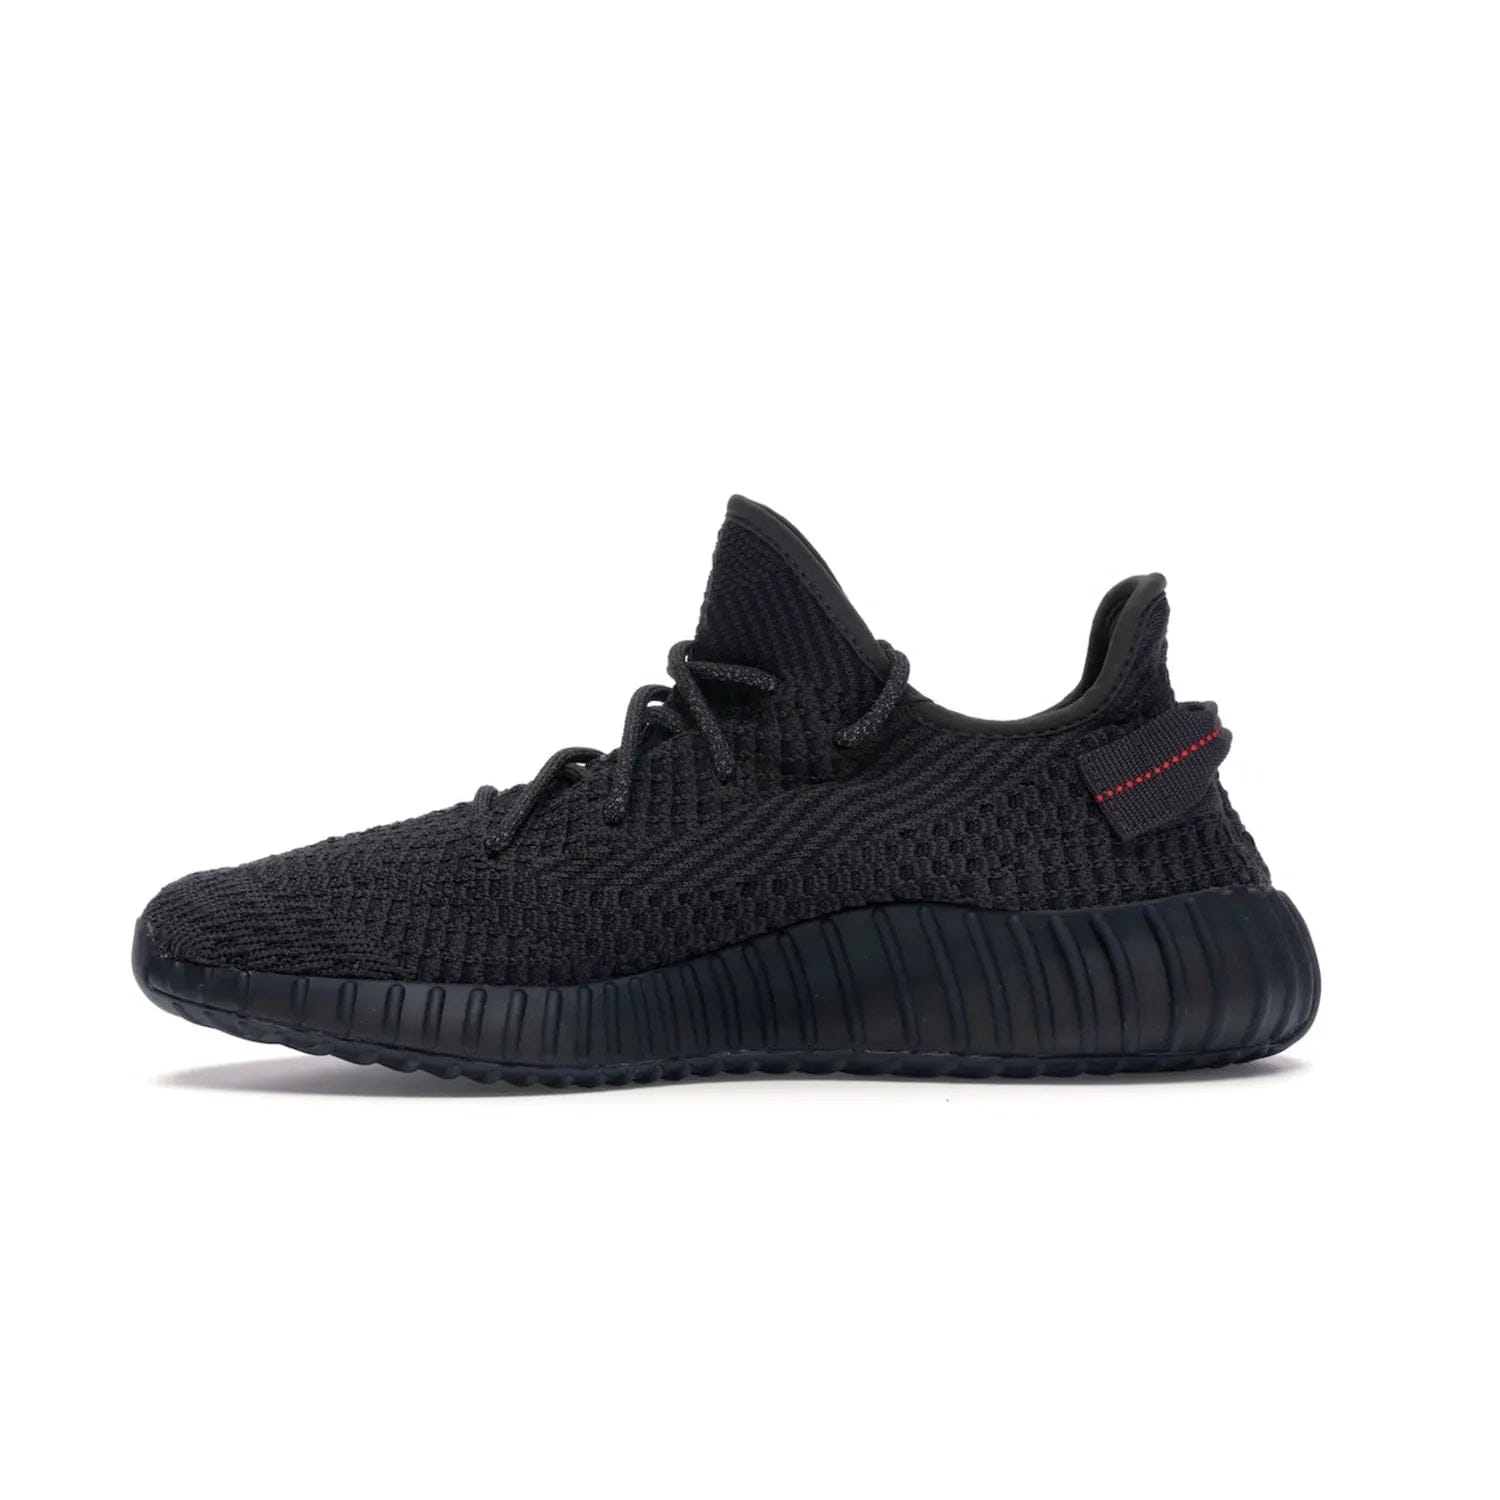 adidas Yeezy Boost 350 V2 Black (Non-Reflective) - Image 19 - Only at www.BallersClubKickz.com - A timeless, sleek silhouette crafted from quality materials. The adidas Yeezy Boost 350 V2 Black (Non-Reflective) brings style and sophistication. Get yours now!